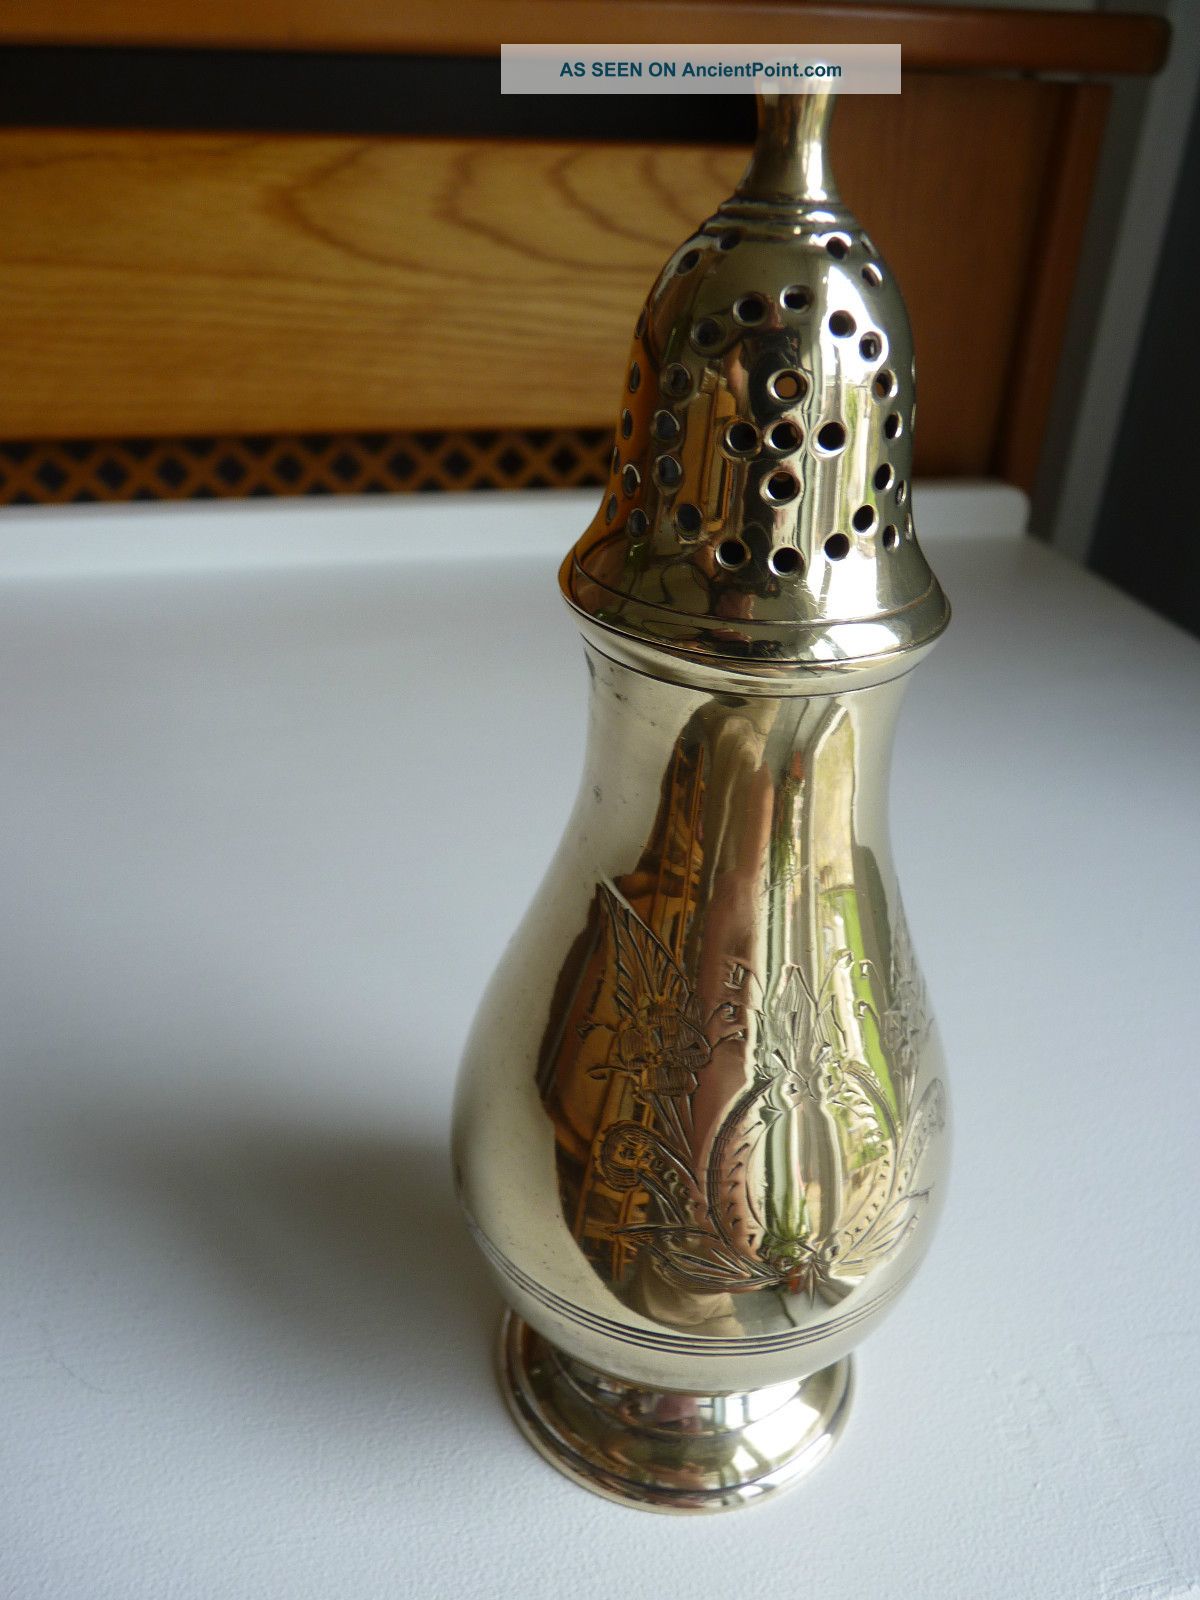 Vintage Silver Plated Sugar Shaker Table Ornate Cartouche Salt & Pepper Cellars/ Shakers photo